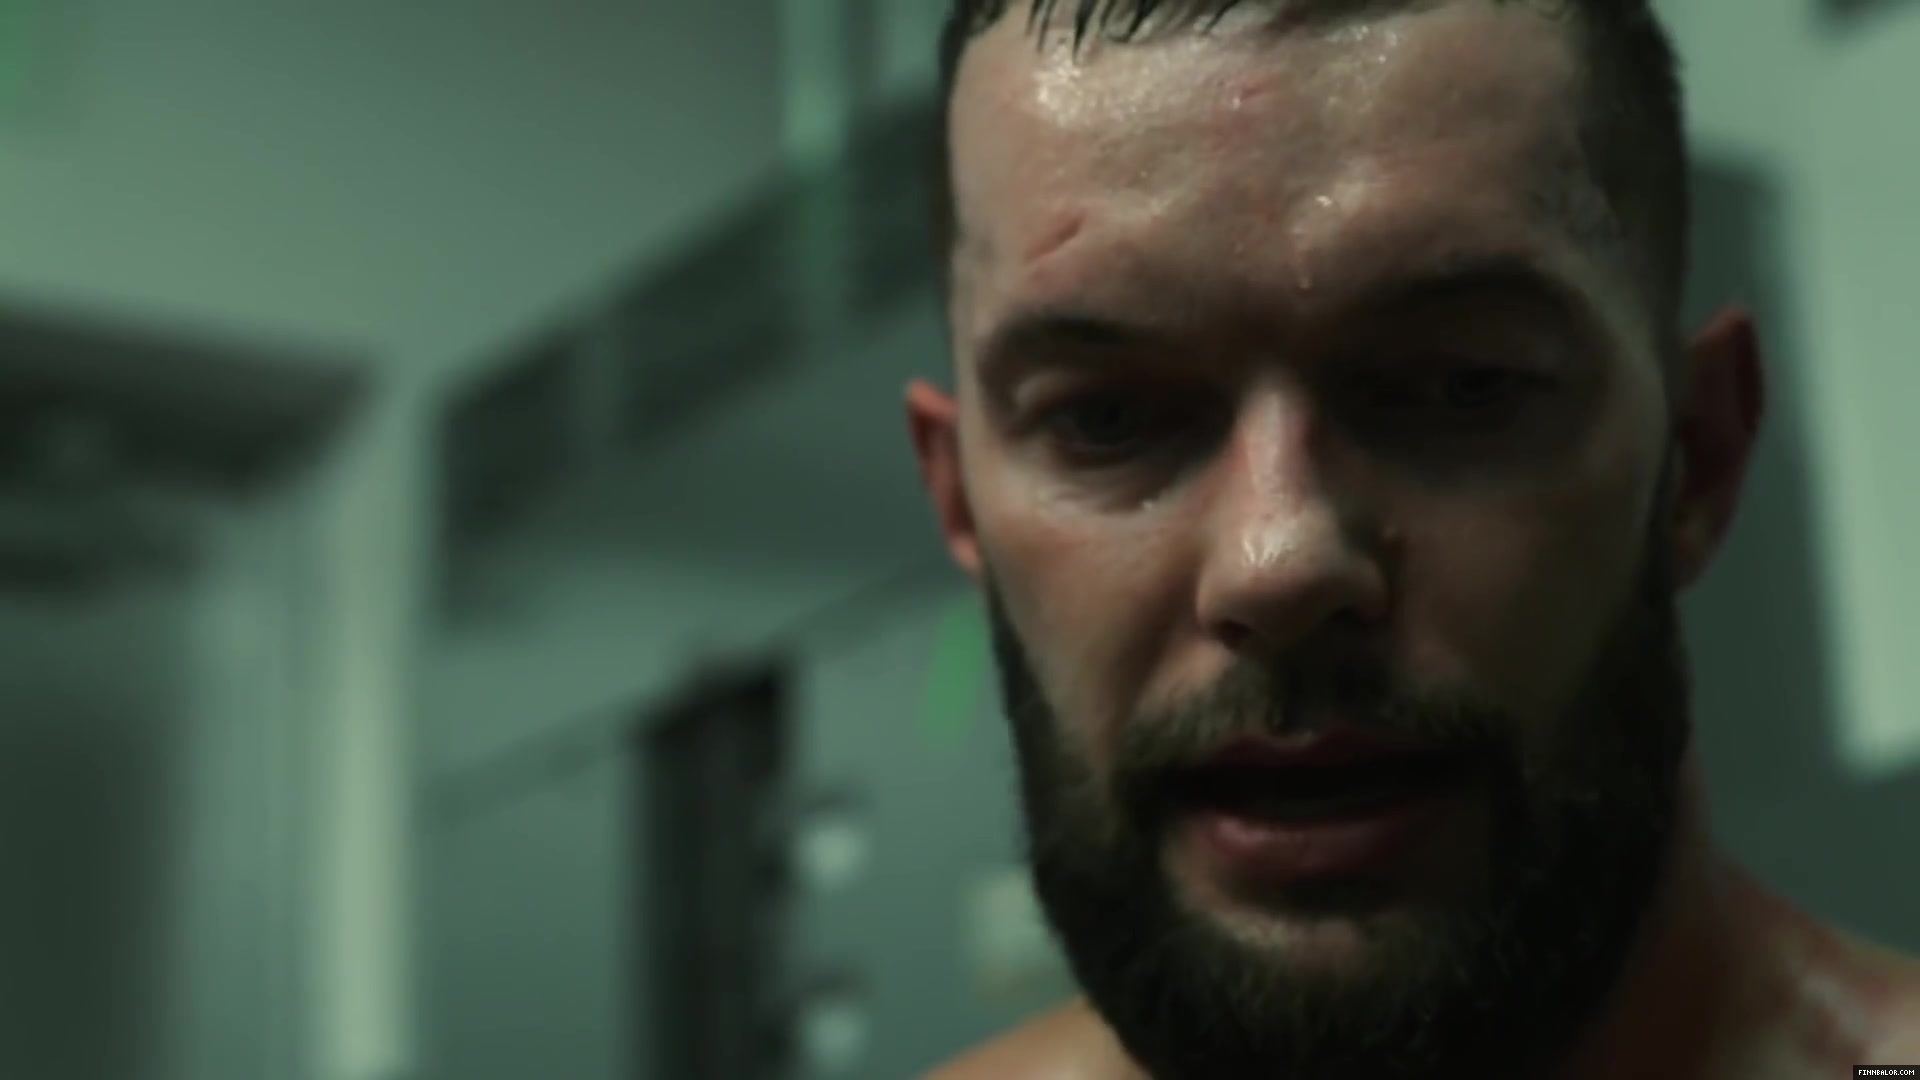 Finn_Balor___The_Rising_of_the_Prince_in_NXT_266.jpg